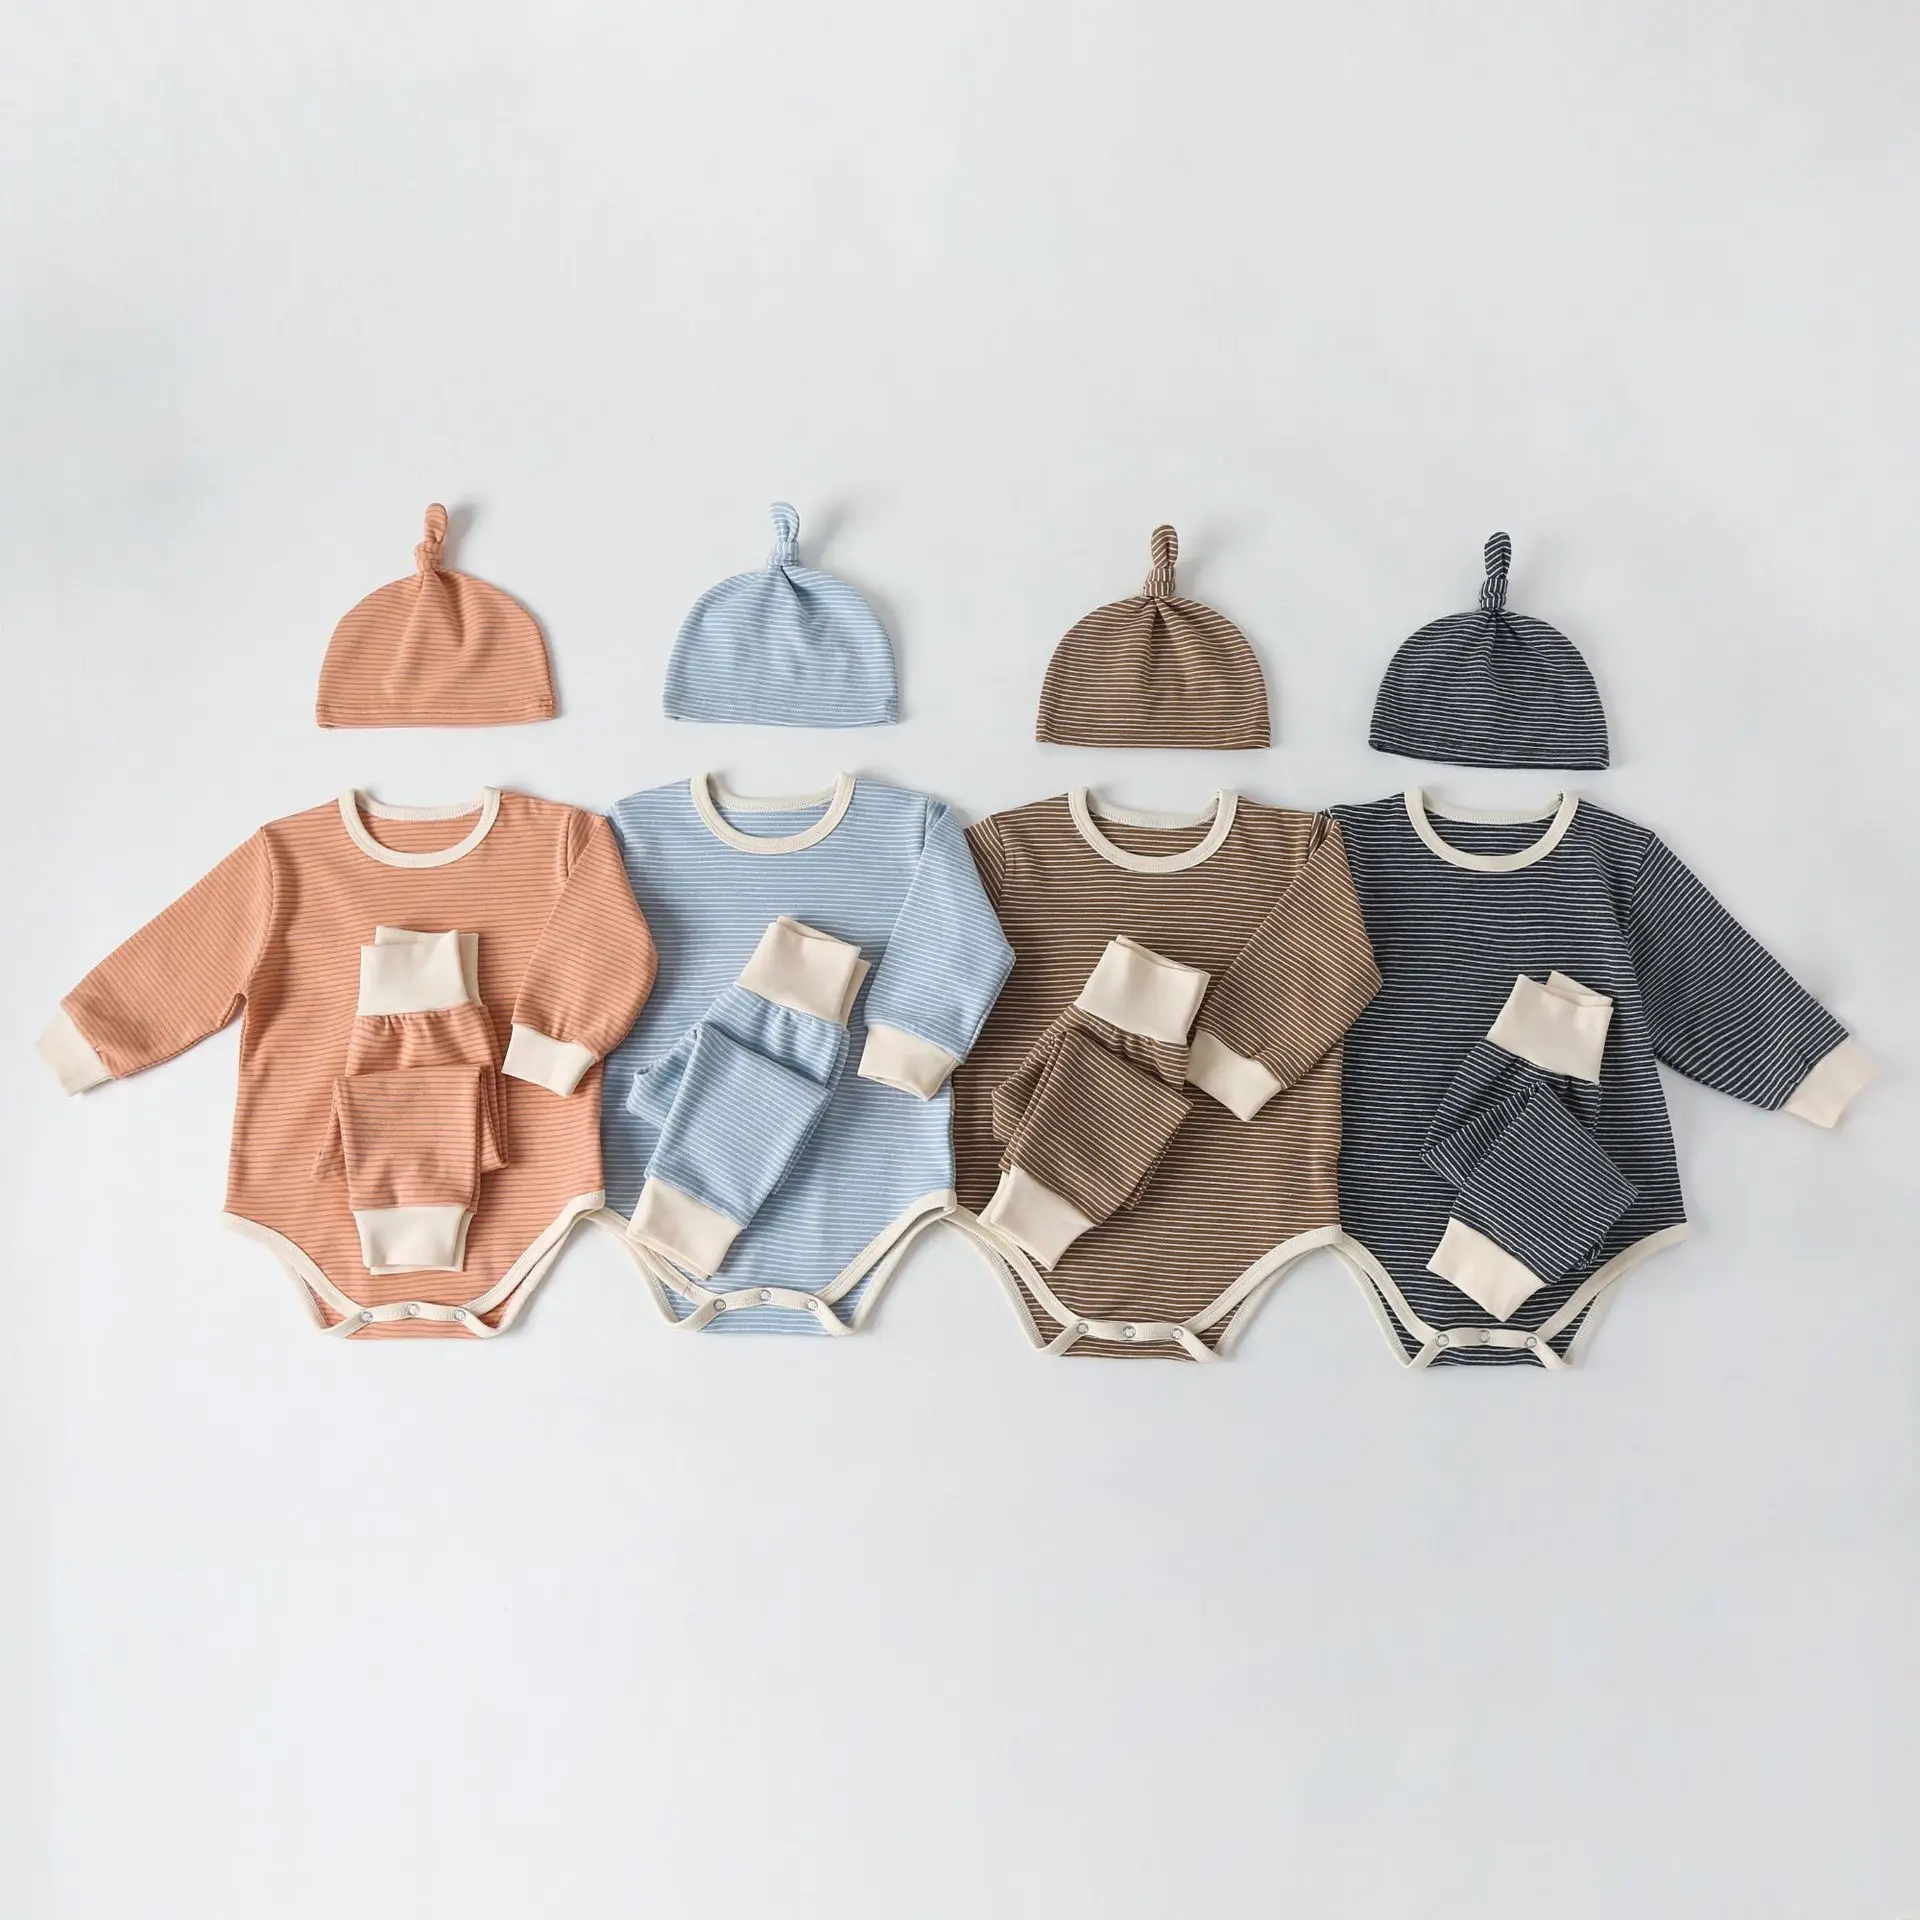 

Hot Sale Ins style 3 pcs spring neutral baby clothes set, baby romper+pant+hat Cotton baby boutique clothing, Various colors and patterns